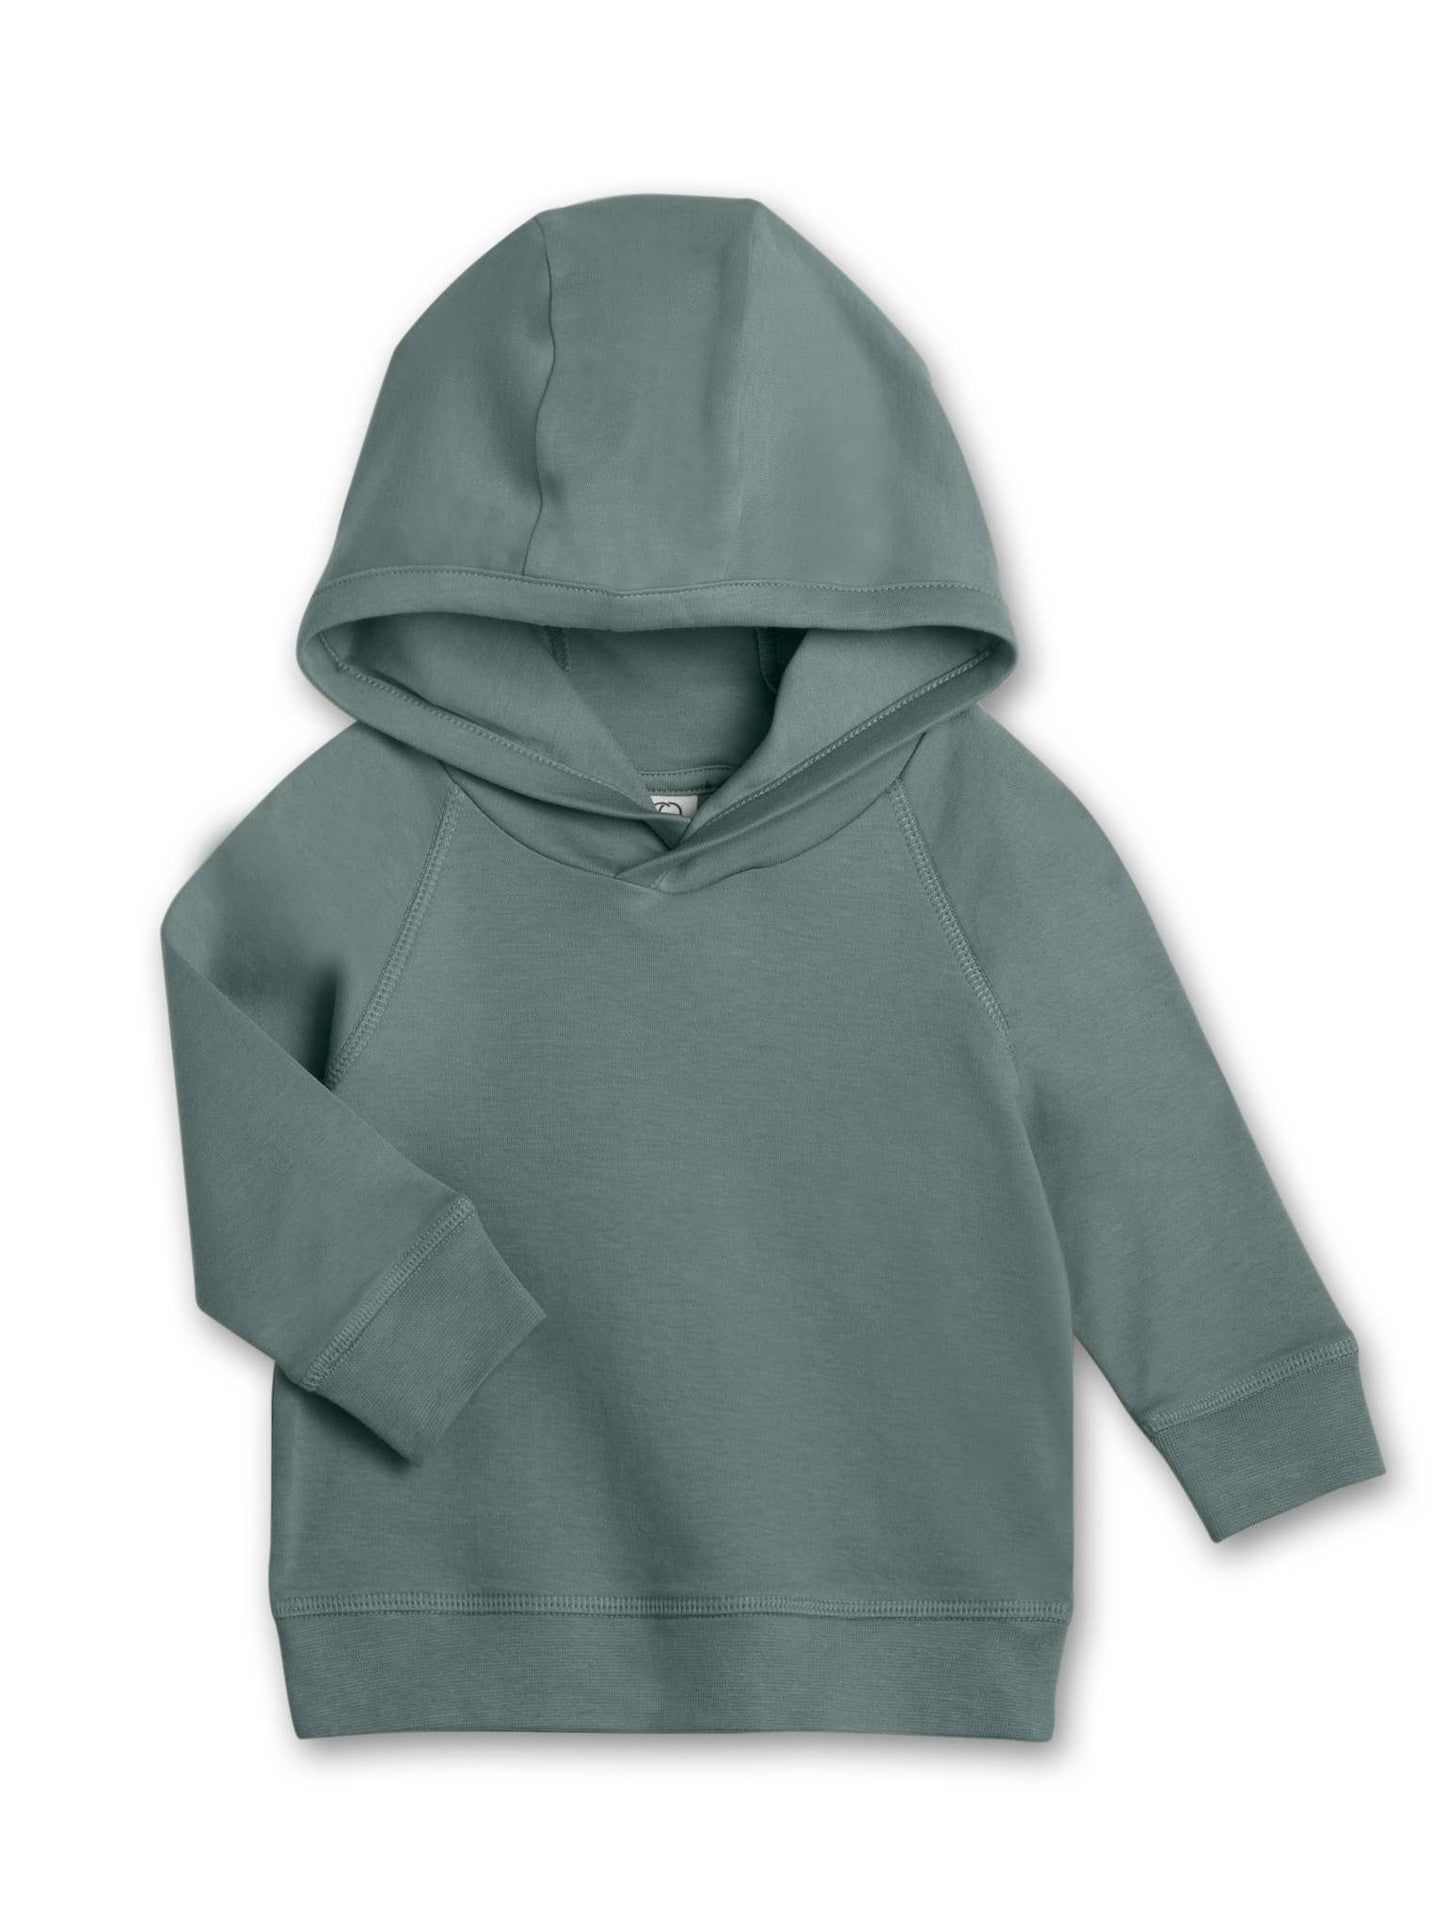 Colored Organics - Madison Hooded Pullover - Balsam